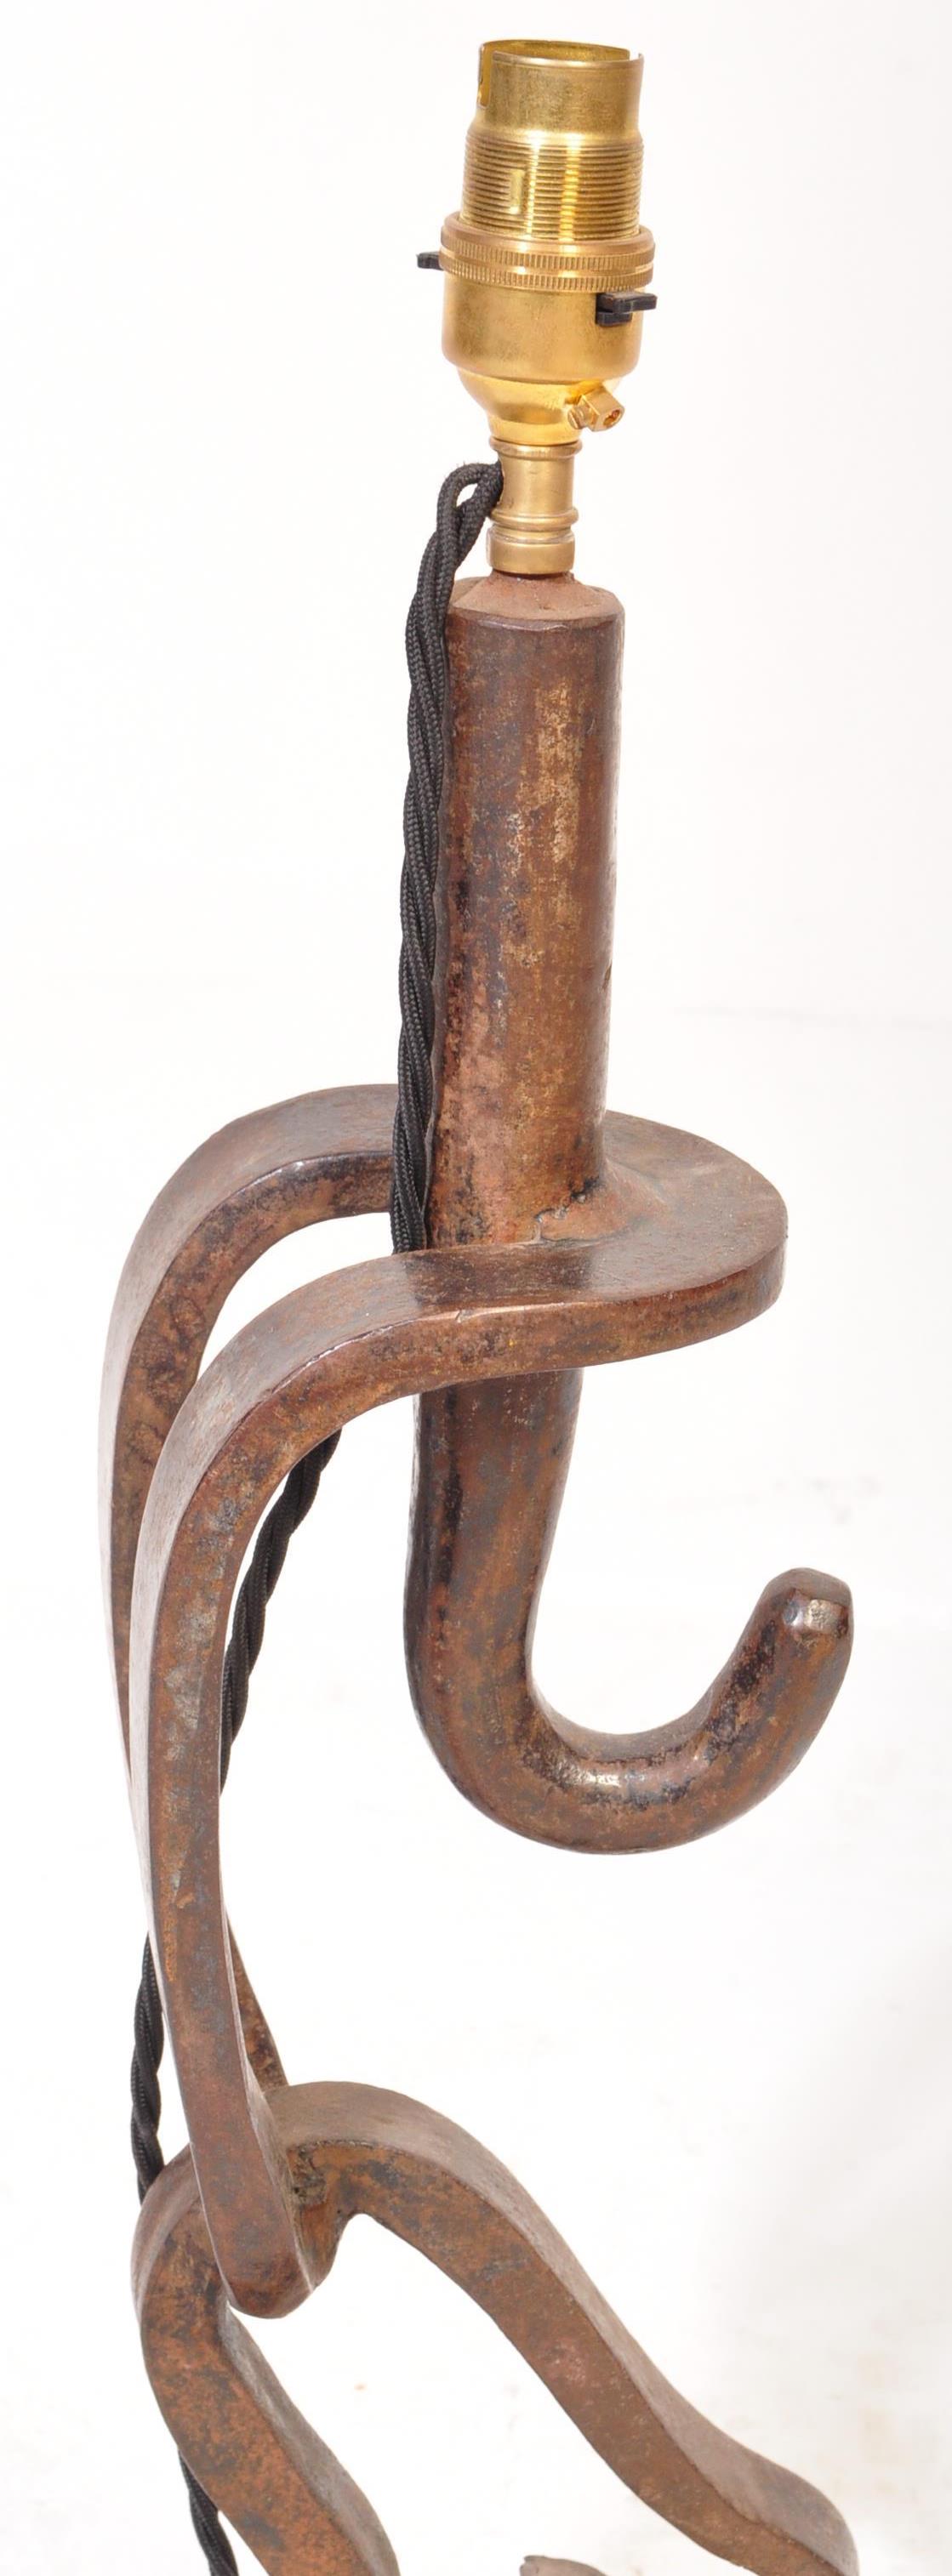 20TH CENTURY ARCHITECTURAL INDUSTRIAL WROUGHT IRON LAMP - Image 3 of 5